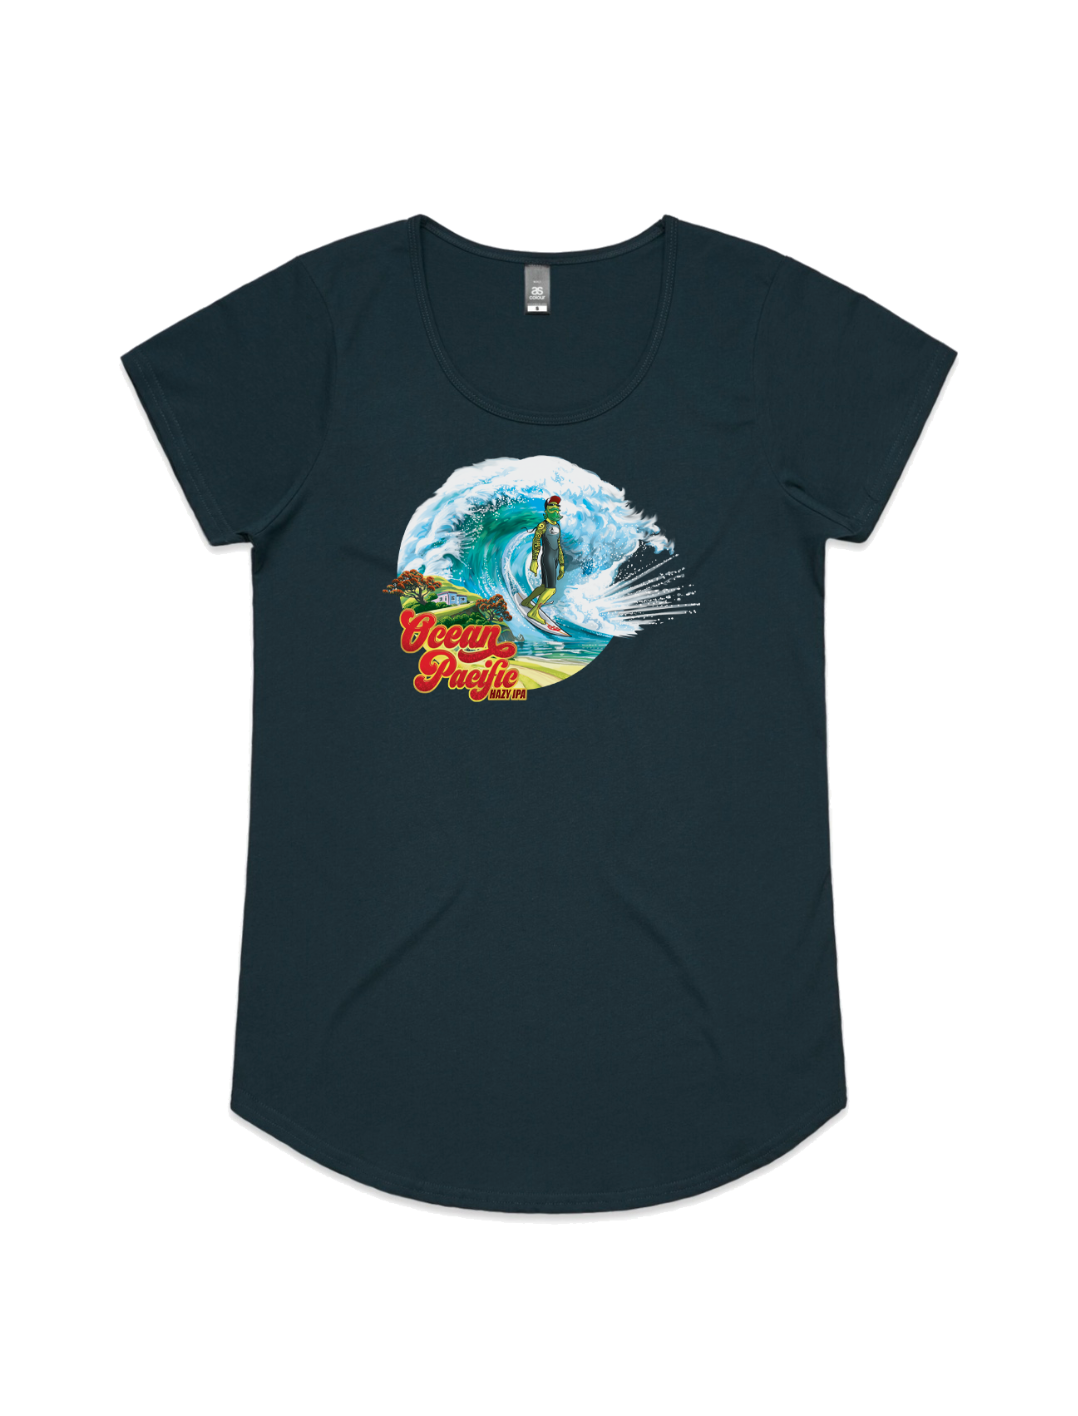 Bach Brewing Womens Short Sleeve T-shirt - Ocean Pacific (front graphic)